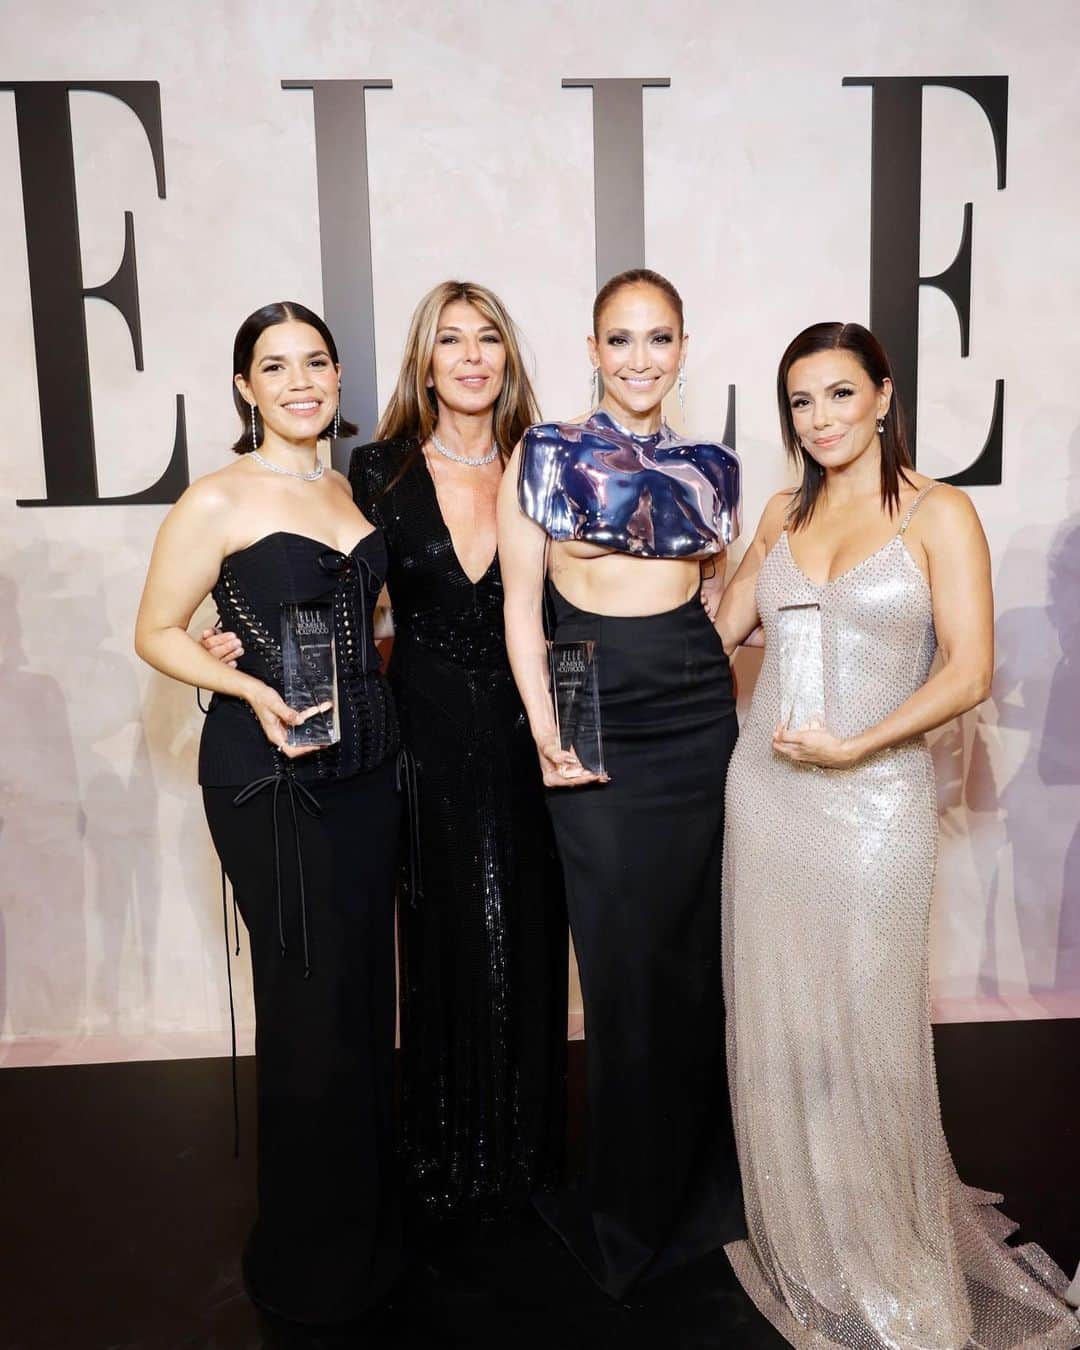 アメリカ・フェレーラさんのインスタグラム写真 - (アメリカ・フェレーラInstagram)「Santa Maria! Hot damn! Holy Shmoly!! I can not find the words to convey the amazingness of last night at Elle Women in Hollywood. Being in a room full of women I love and admire was life-giving! Every single speech was personal, wise and profound. My soul sister Eva Longoria presented me with the most moving speech I have ever had given to me. She made me sob as only she can because she is the person in this industry who knows my experiences so intimately and really truly sees me. Thank you Eva for presenting to me even as you were being honored yourself by the equally amazing @kerrywashington ! Slide 7 is the look on my face all night- just deeply in awe and in gratitude to witness the light of all the women being honored - @lilygladstone @jlo @tarajiphenson @tasiasword @daniebb3 #JodieFoster #GretaLee @evalongoria   Thank you @elleusa & @ninagarcia 💜  And I was so honored to have some of my favorite Women in Hollywood by my side, my team and mentors who fight for me and lift me up every day- @trustalexandra @kawachouttt @haubegger @carriebyalick @ntlmoran @taranitup49 @secretagentm   This past week has been overwhelmingly full of love and recognition for my work as an actress and advocate. I don’t take a single moment of it for granted. Thanks for being on the journey with me. 🥹  And thank you as ever to the glam team that helps me look and feel as powerful on the outside as I do on the inside 😘 @karlawelchstylist  @carolagmakeup  @hairbyaviva  @jamiespradley  @gracewrightsell」12月7日 8時22分 - americaferrera